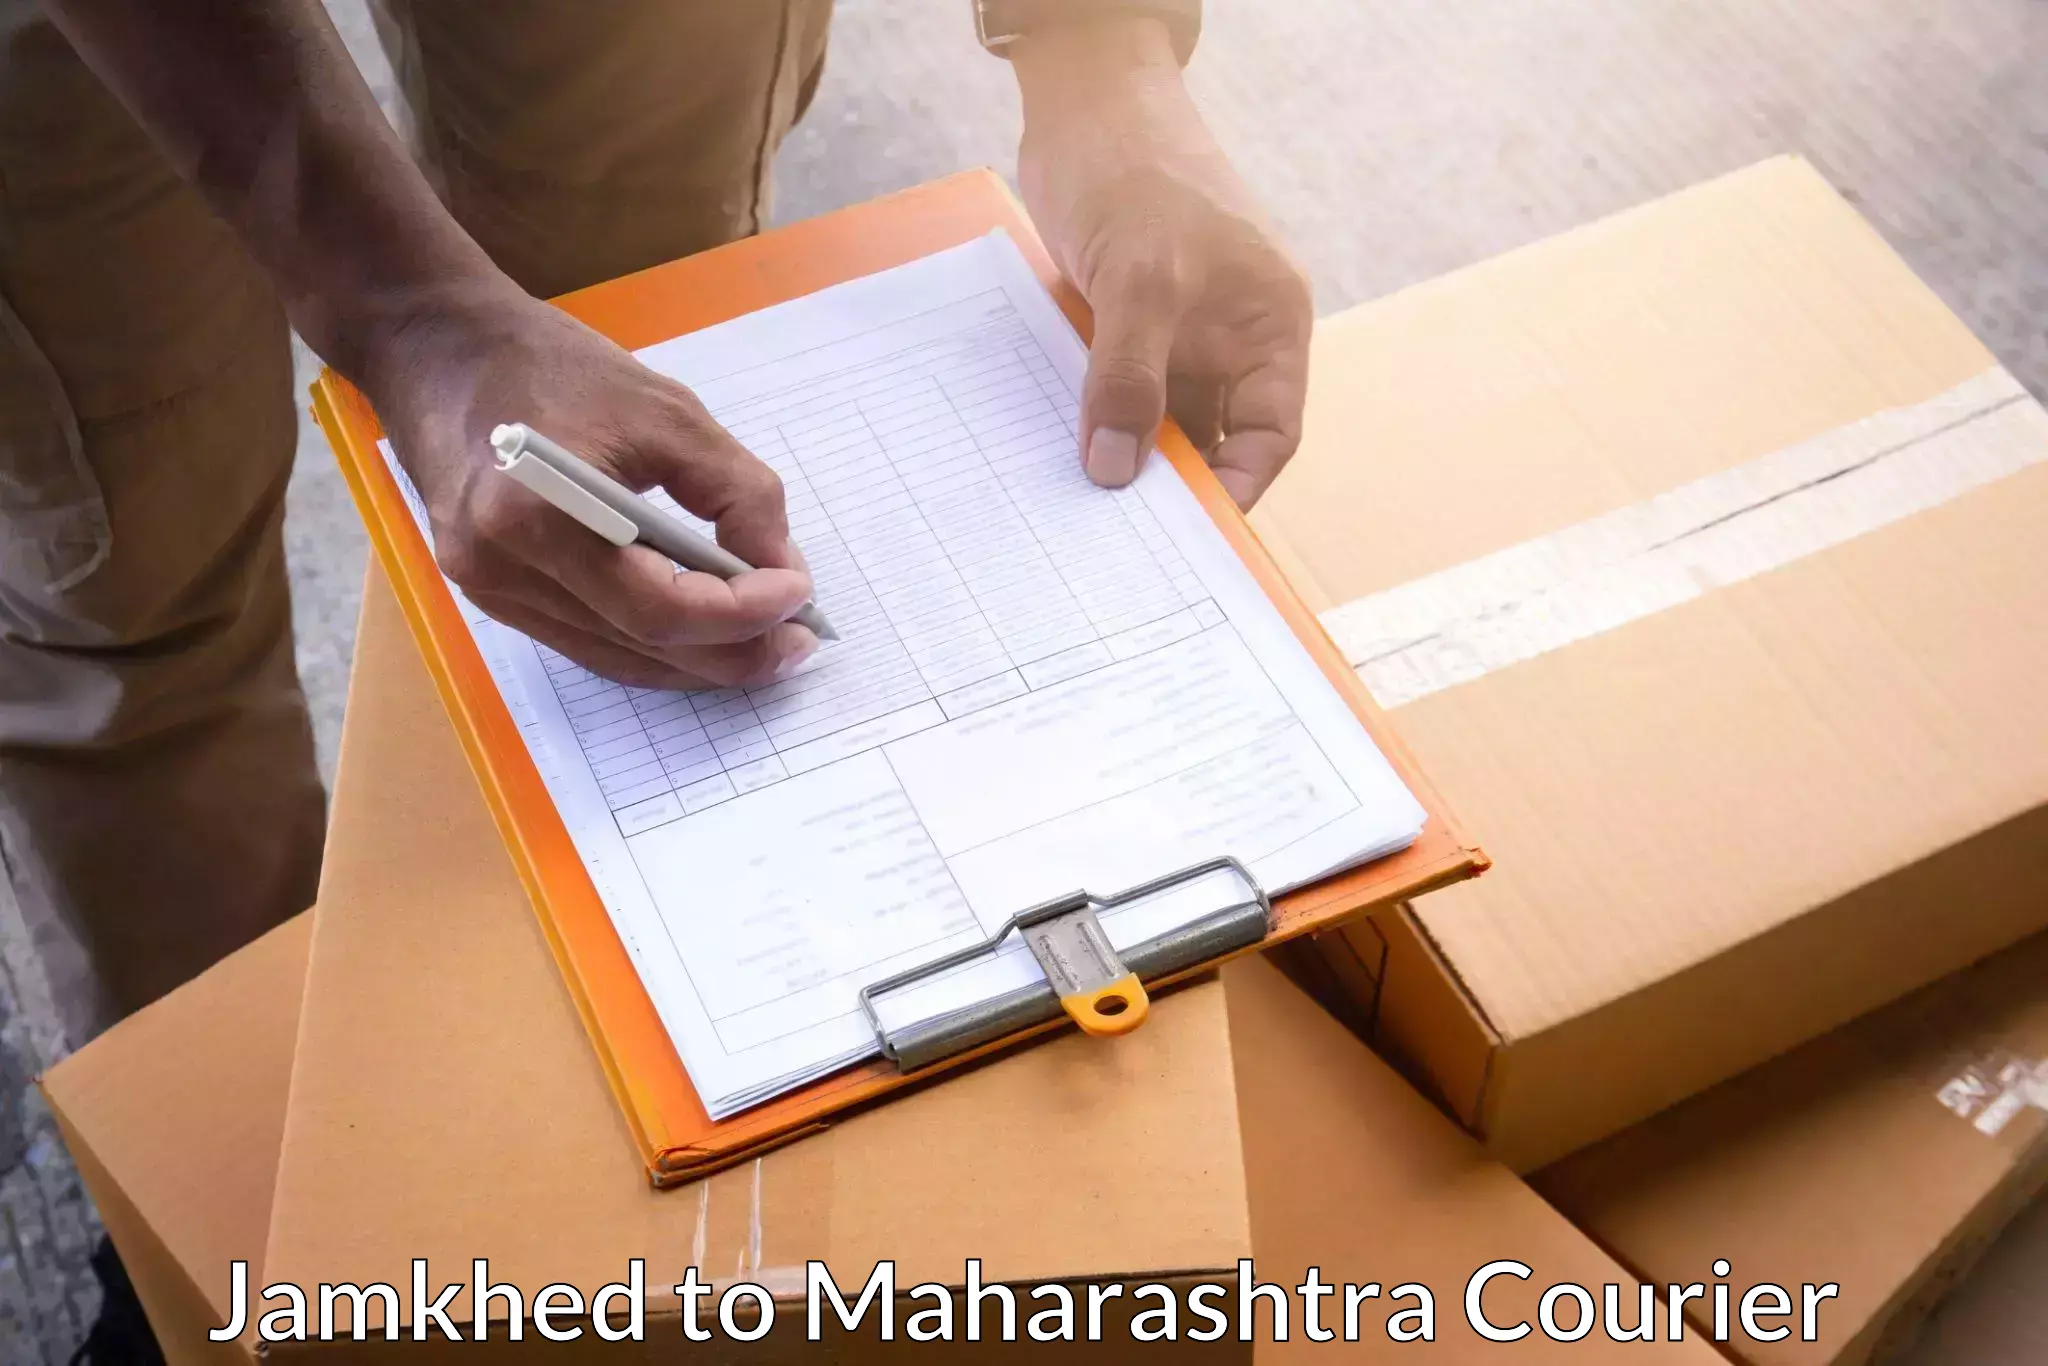 Bulk courier orders in Jamkhed to Bhiwandi